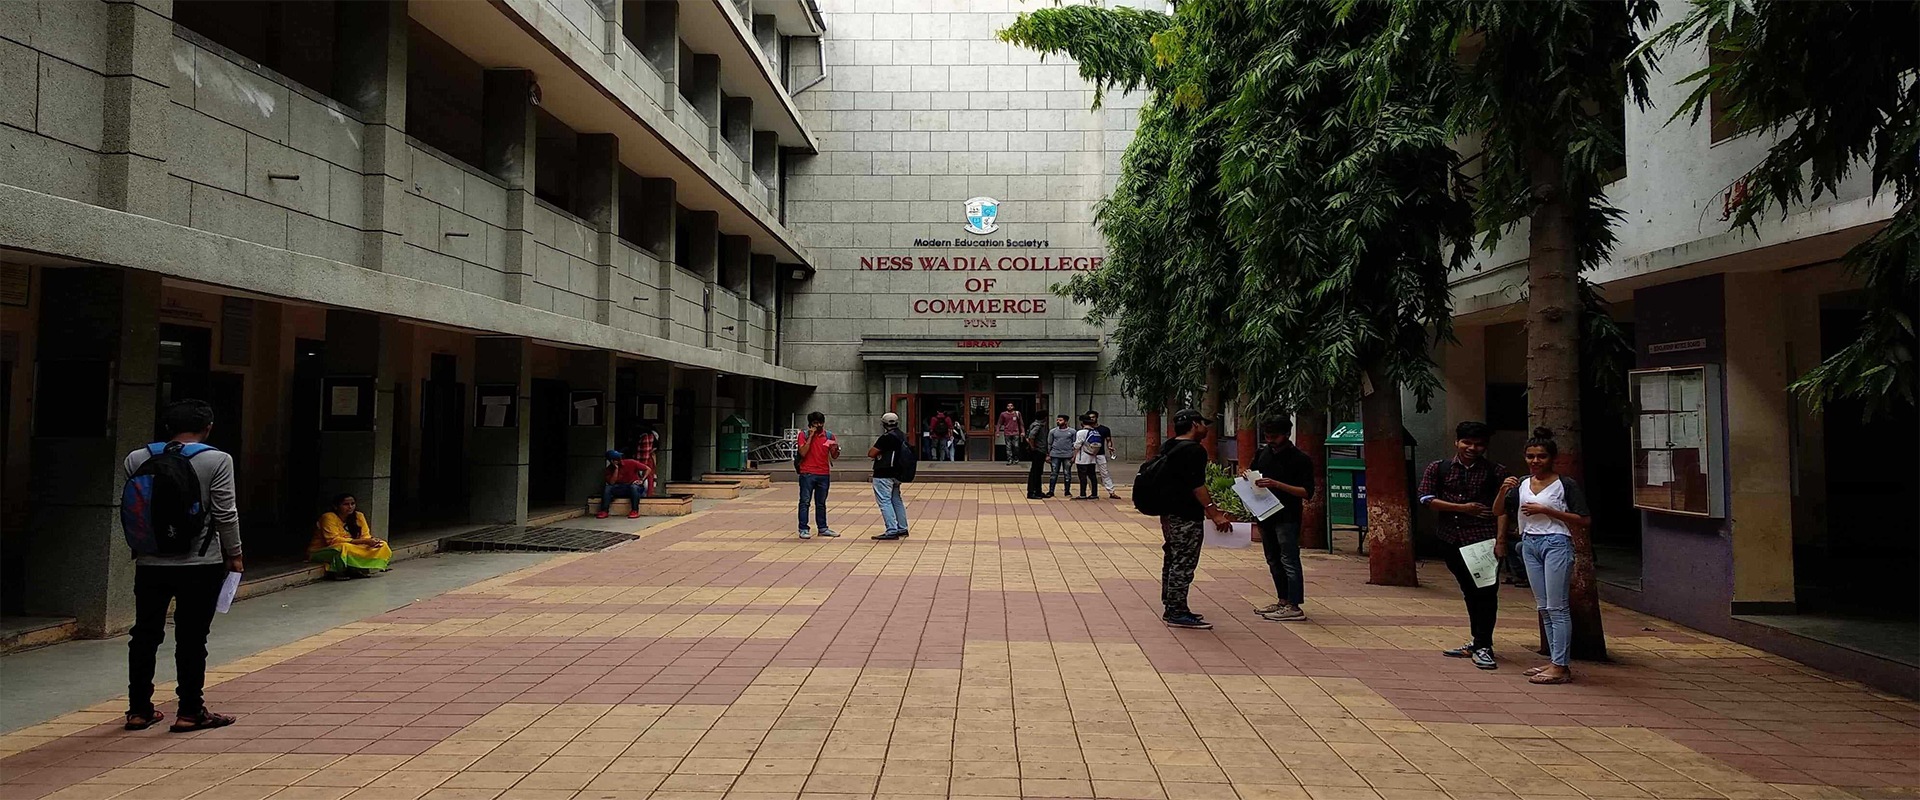 Ness Wadia College of Commerce (NWCC), Pune